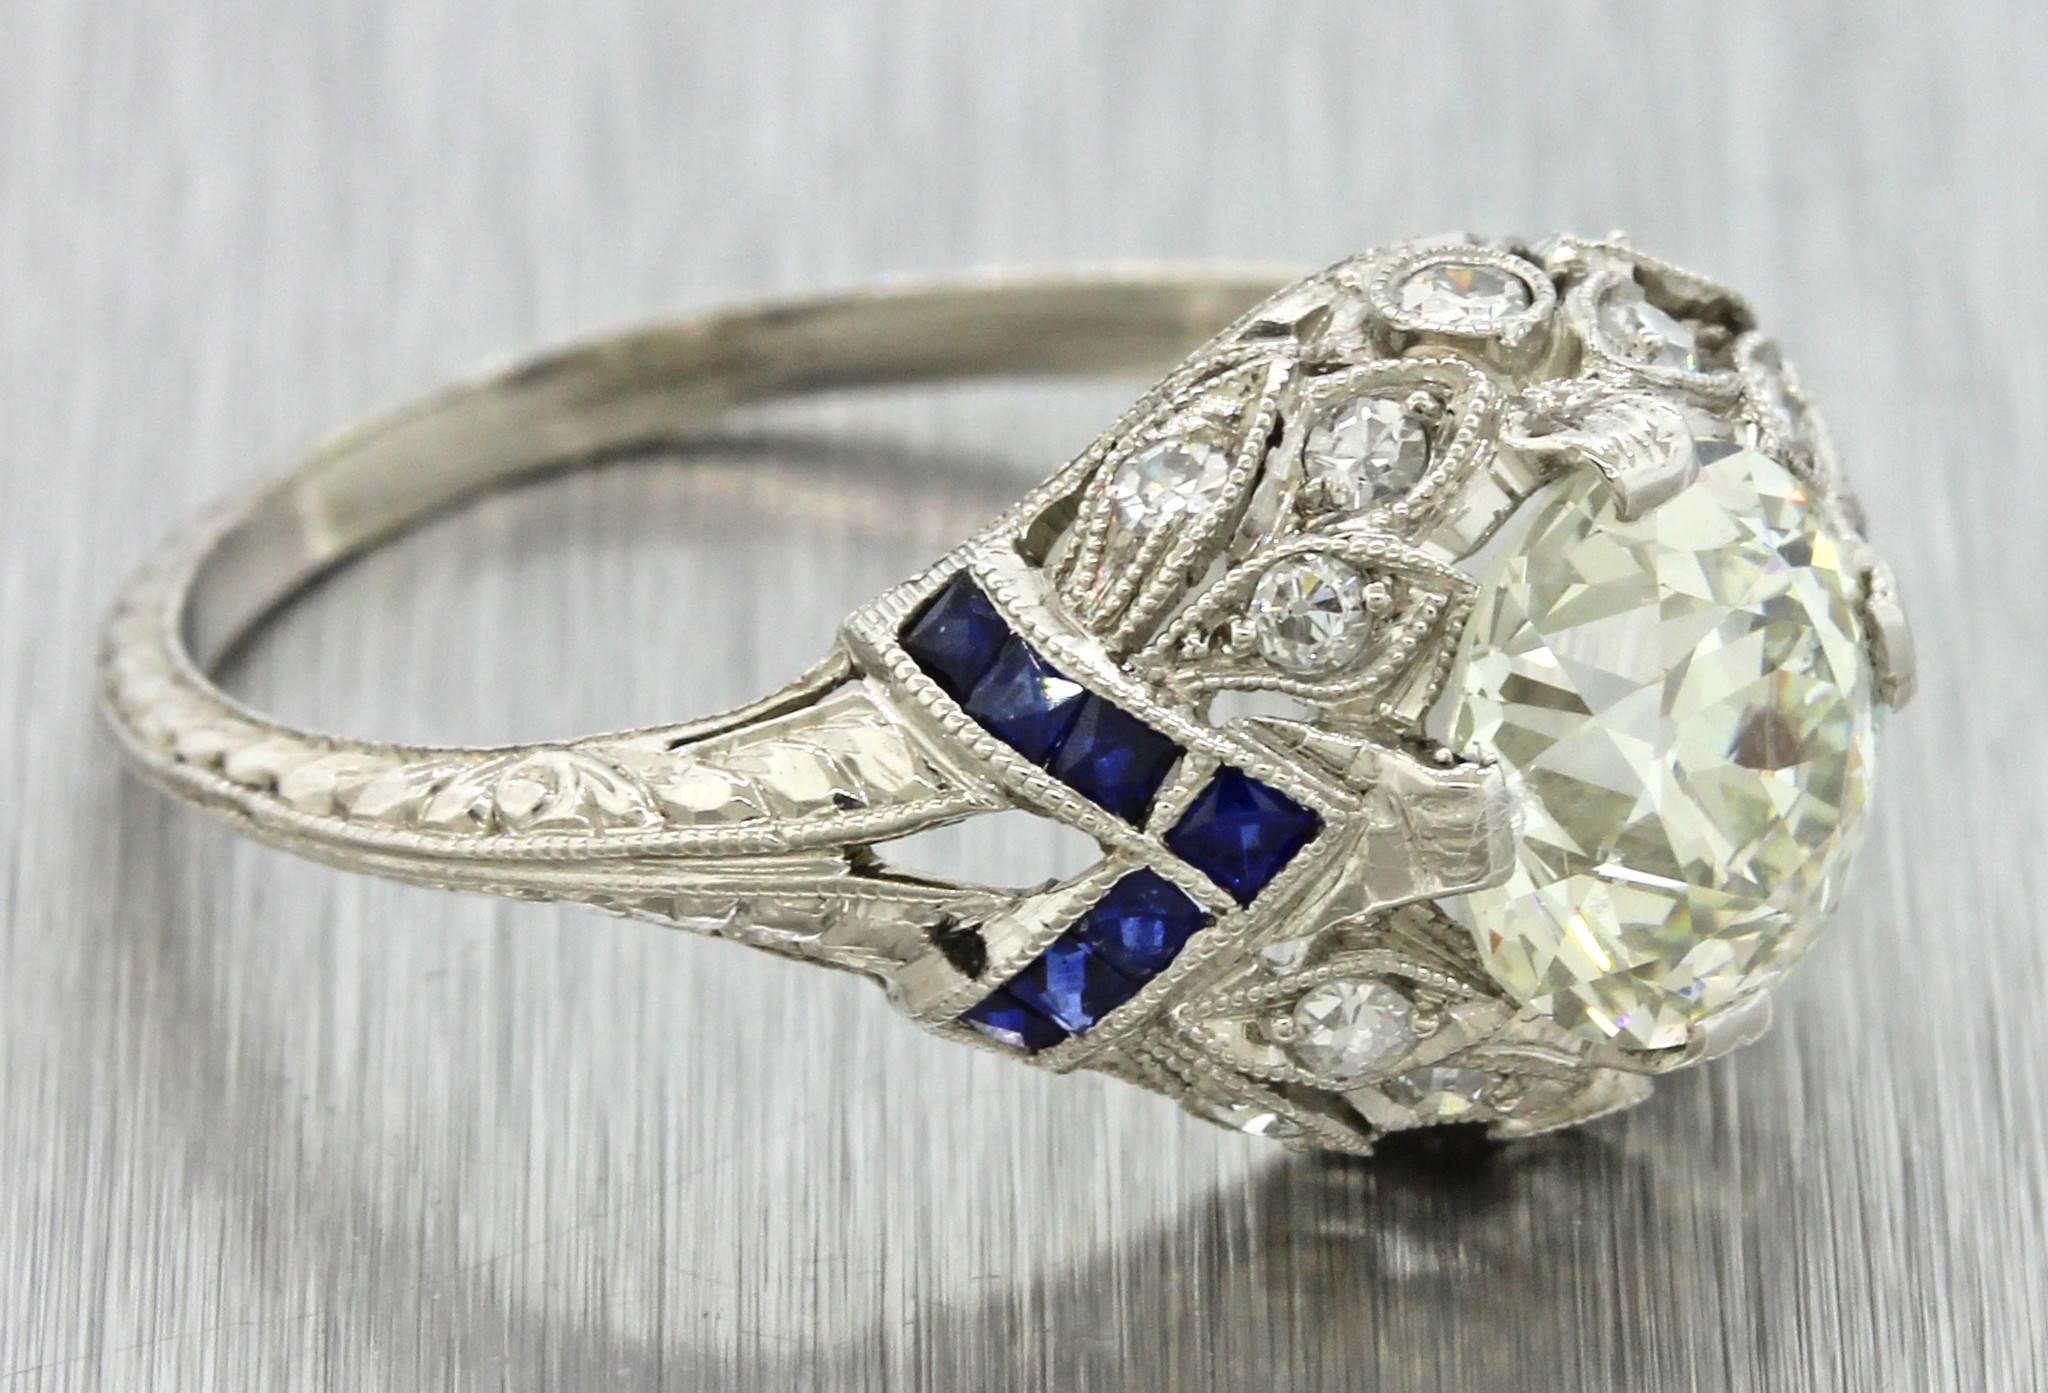 Antique Art Deco Platinum Filigree 1.68carat Diamond Sapphire Engagement Ring In Excellent Condition For Sale In Huntington, NY